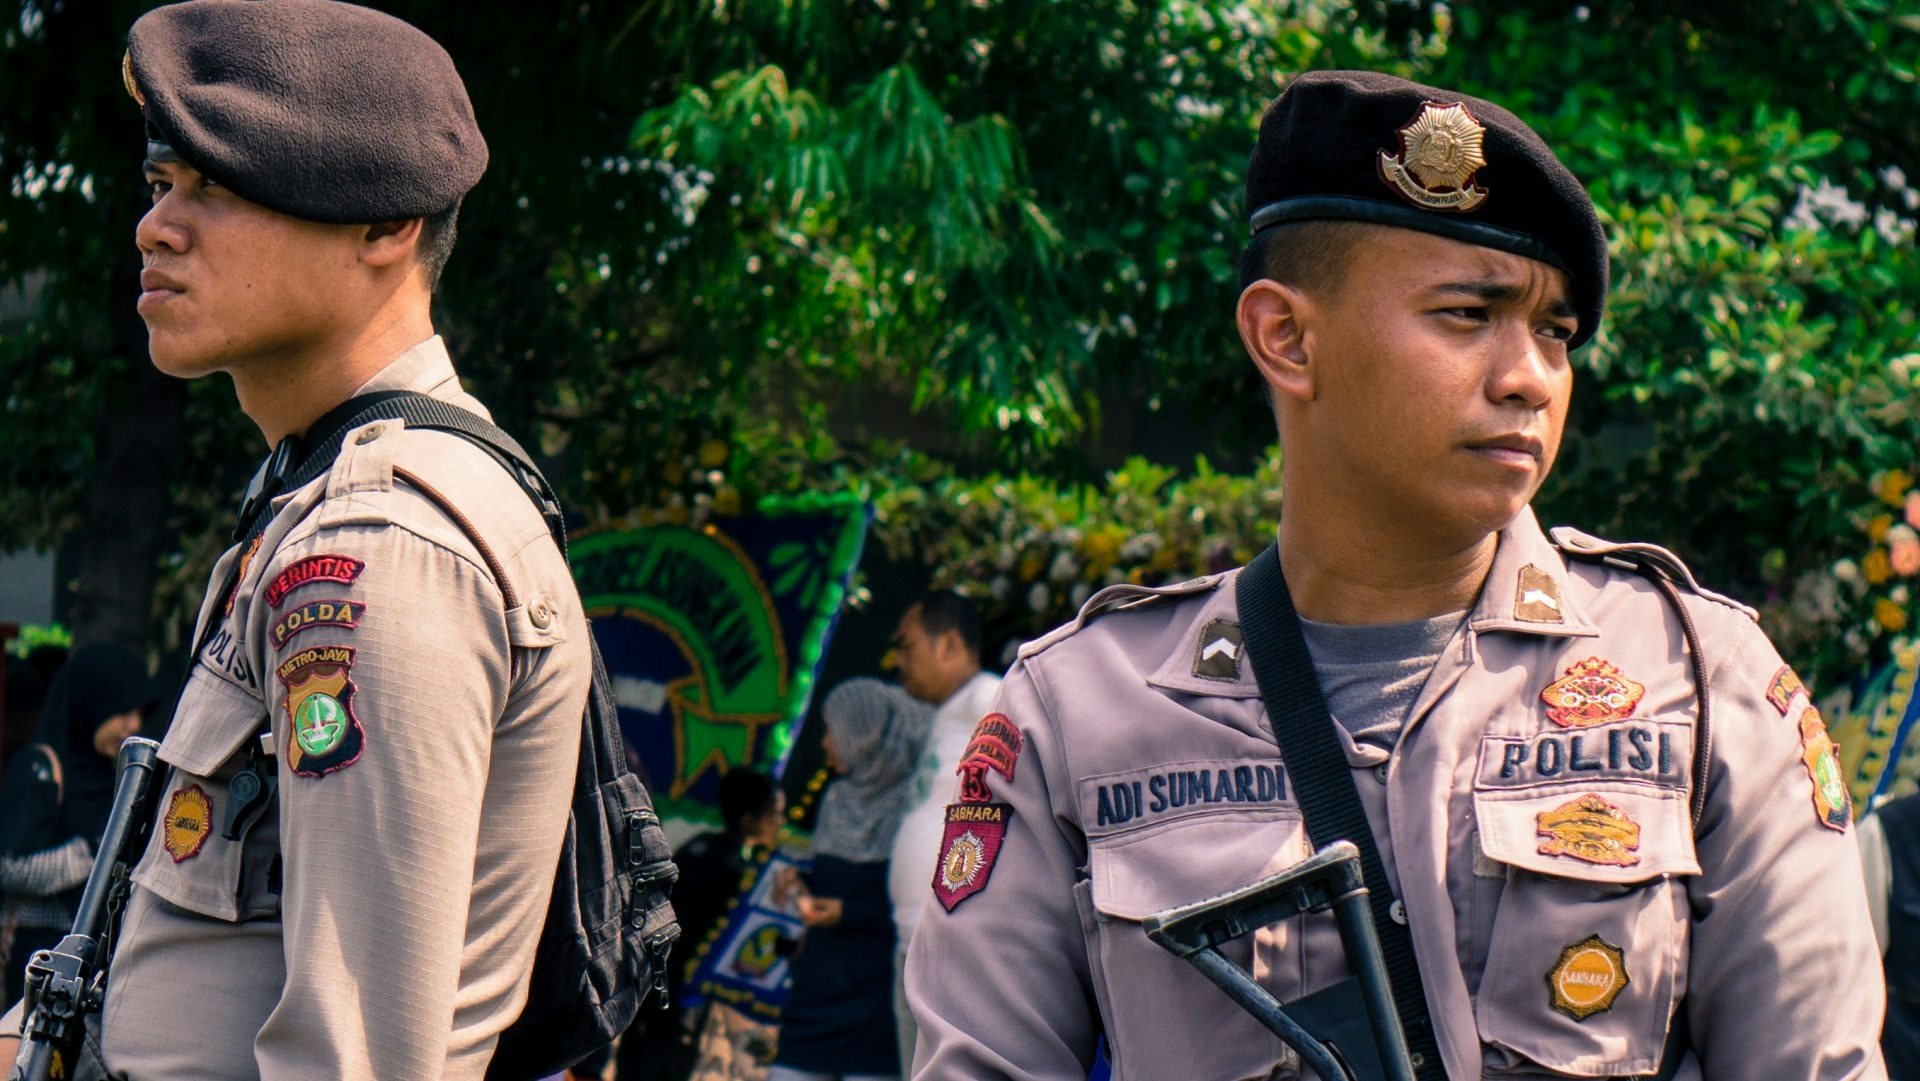 Indonesian police on high alert after terrorist attack in January. (ardiwebs/Shutterstock.com)